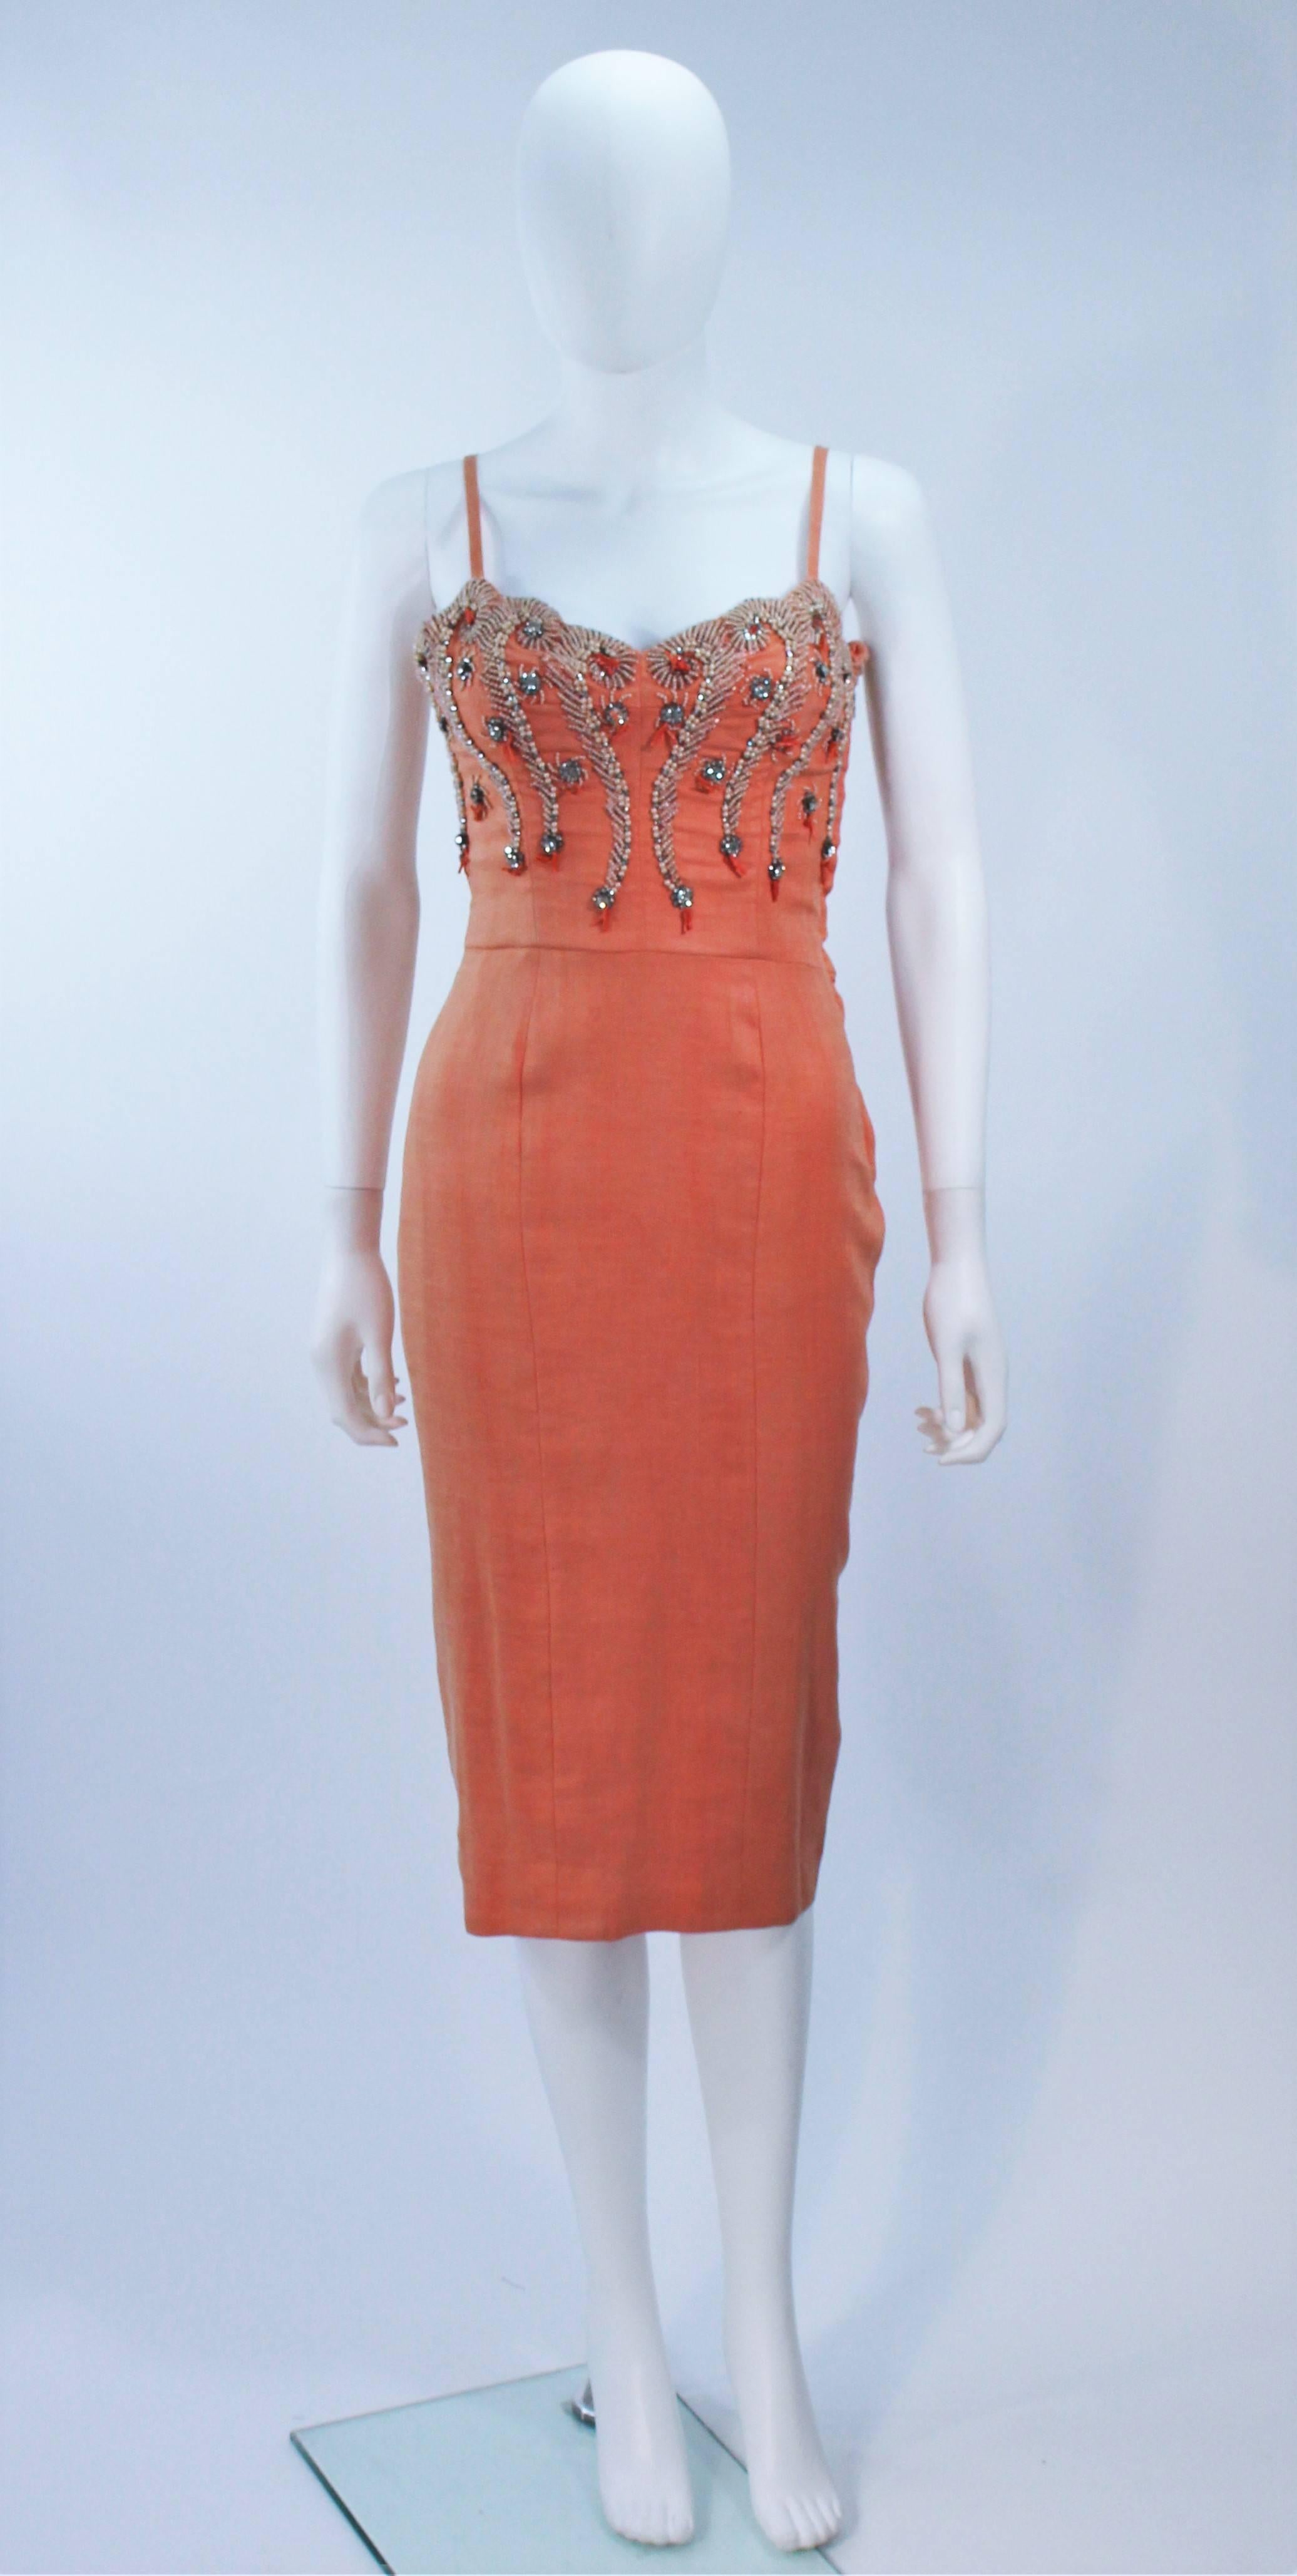  This cocktail dress is composed of a coral hue linen with a beaded applique (Rhinestones, faux pearls, beads). There is a center back zipper closure. In excellent vintage condition, color variation of fabric due to age. 

  **Please